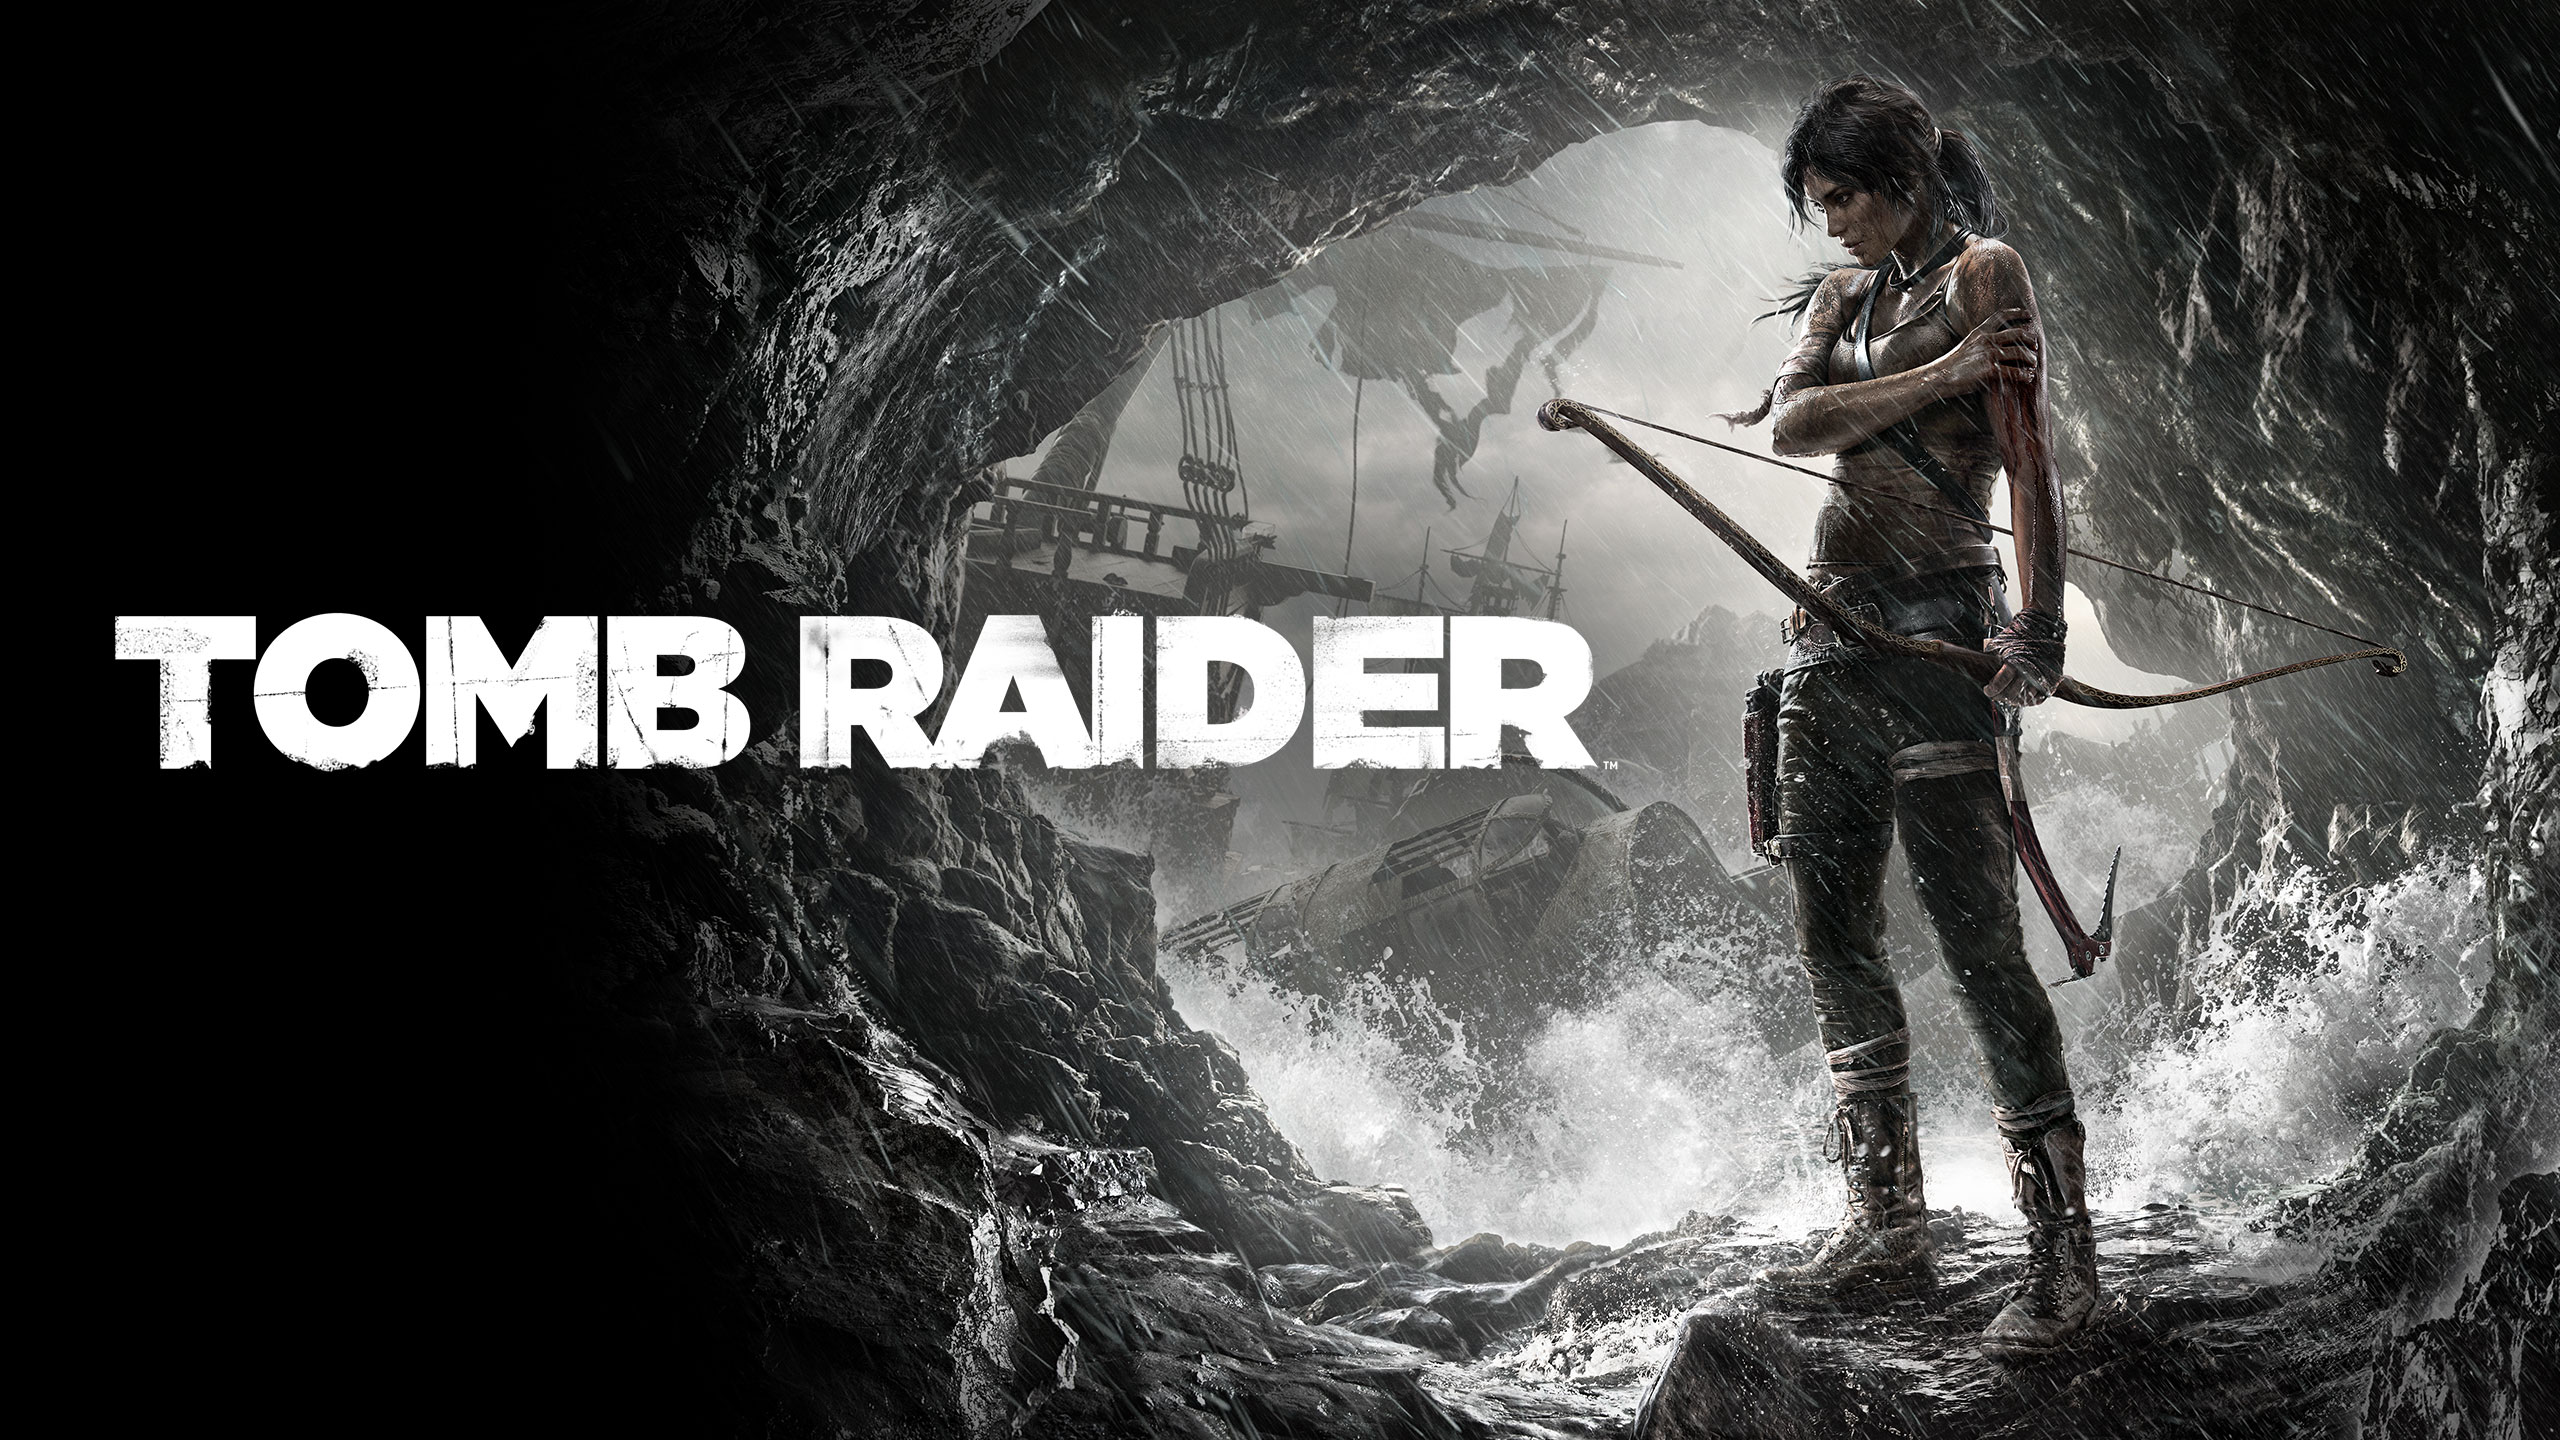 Tomb Raider GAME OF THE YEAR EDITION. Download and Buy Today Games Store